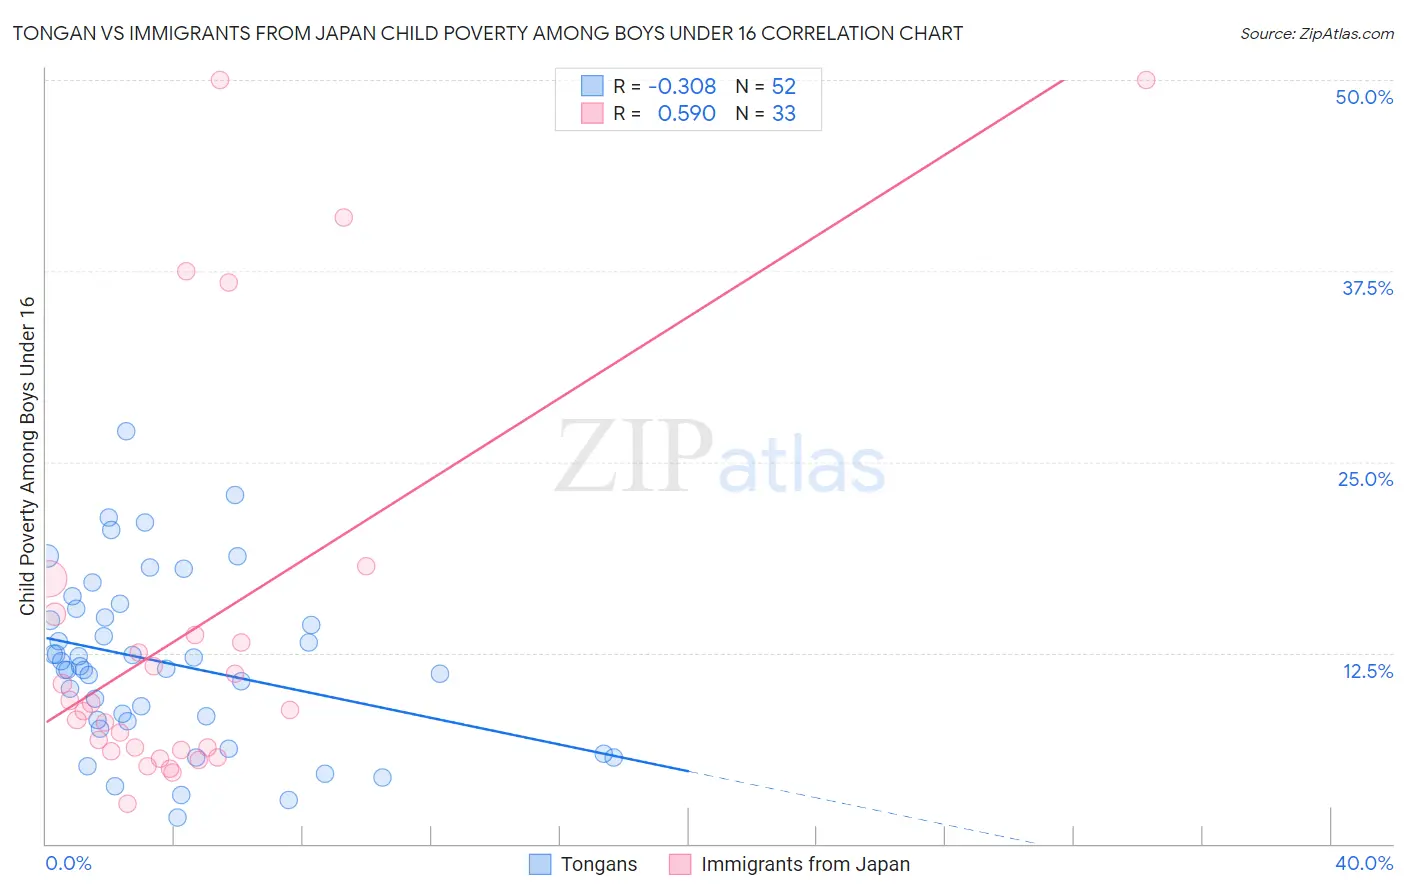 Tongan vs Immigrants from Japan Child Poverty Among Boys Under 16